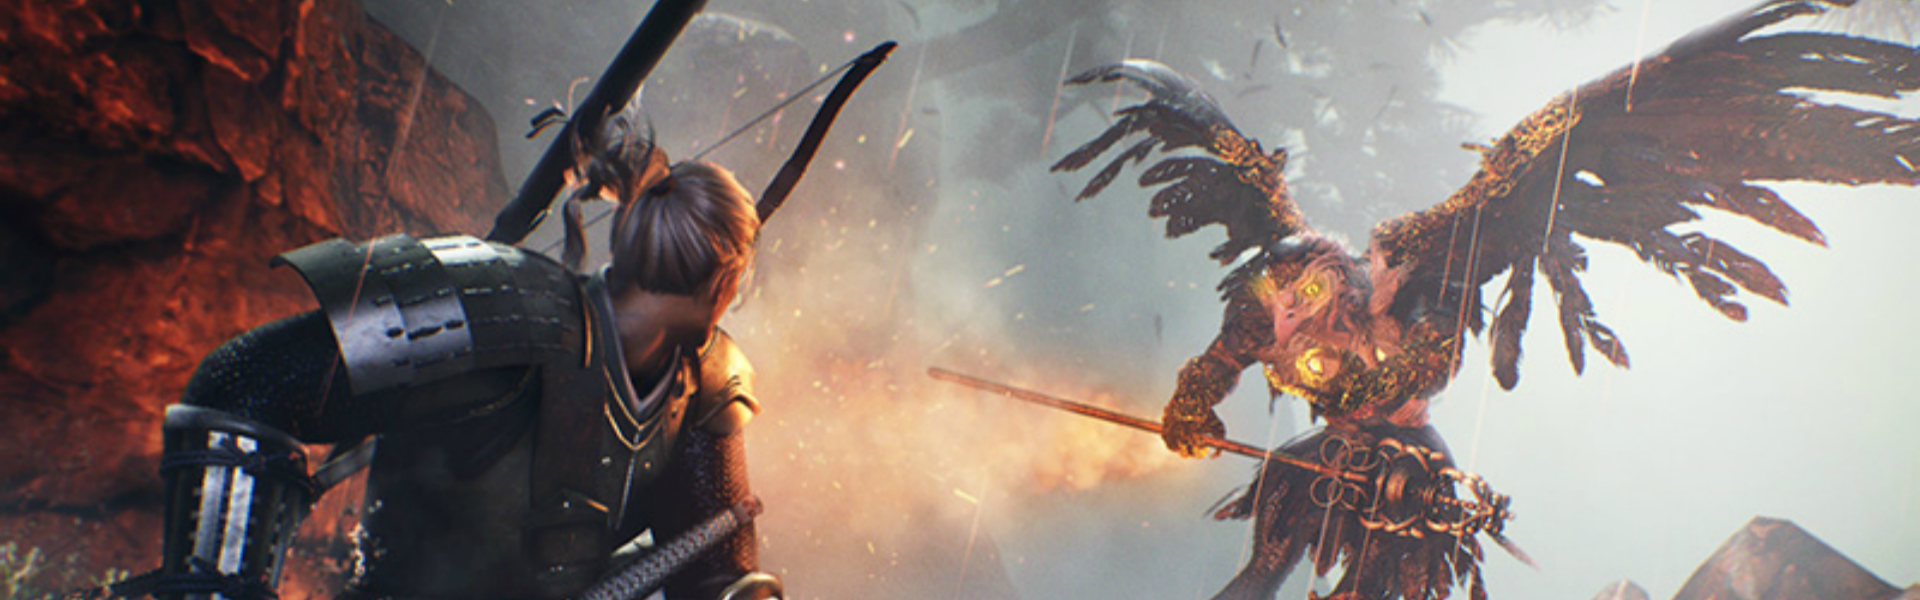 Nioh:Last Chance] [Screenshot] Few banners for your profile. #Playstation4 # PS4 #Sony #videogames #playstation #gamer #g. Playstation Playstation, Indie games